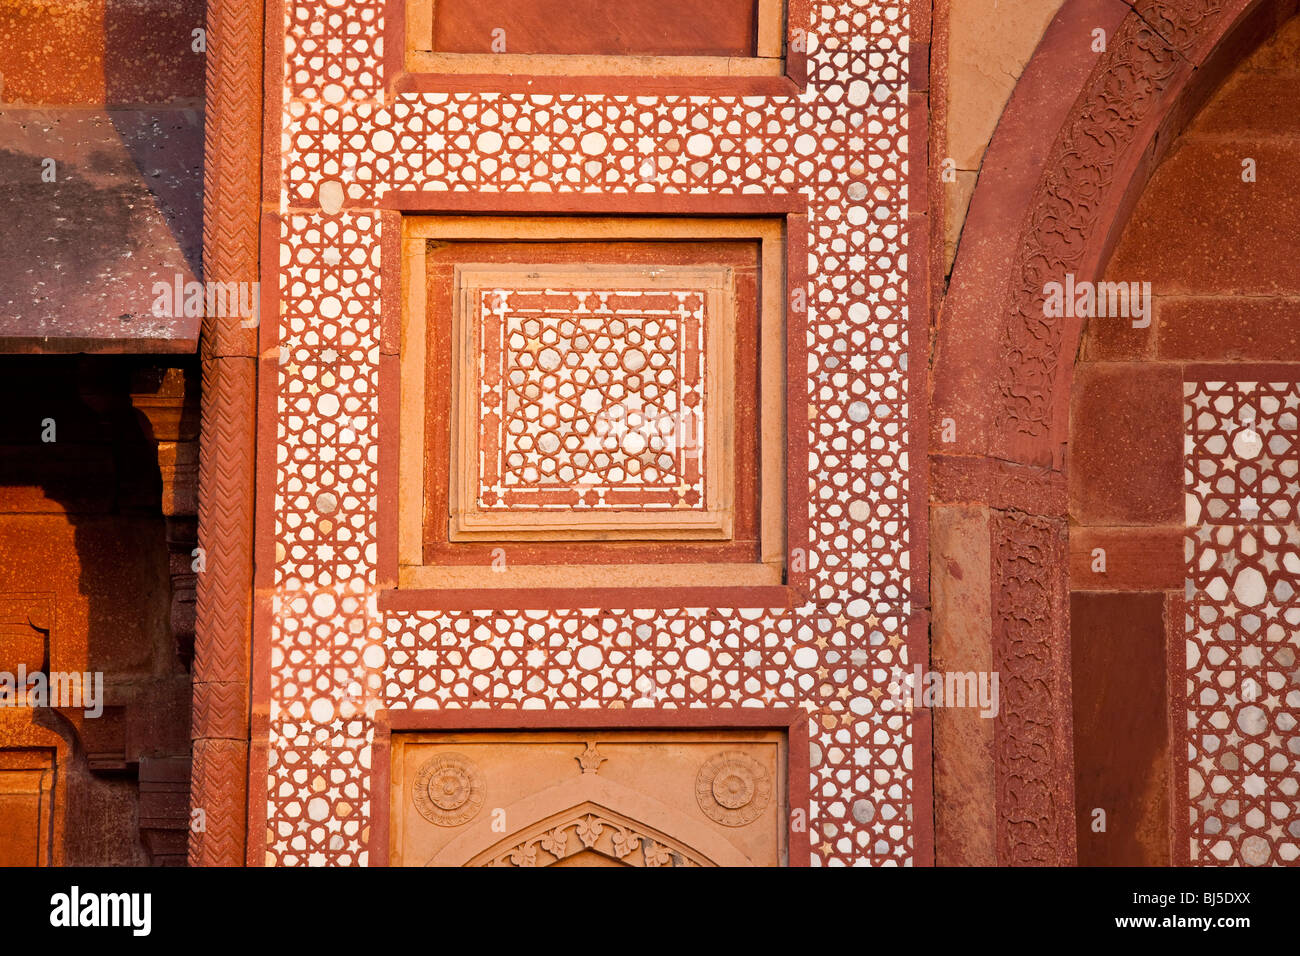 Islamic detail inside the Friday Mosque in Fatehpur Sikri India Stock Photo